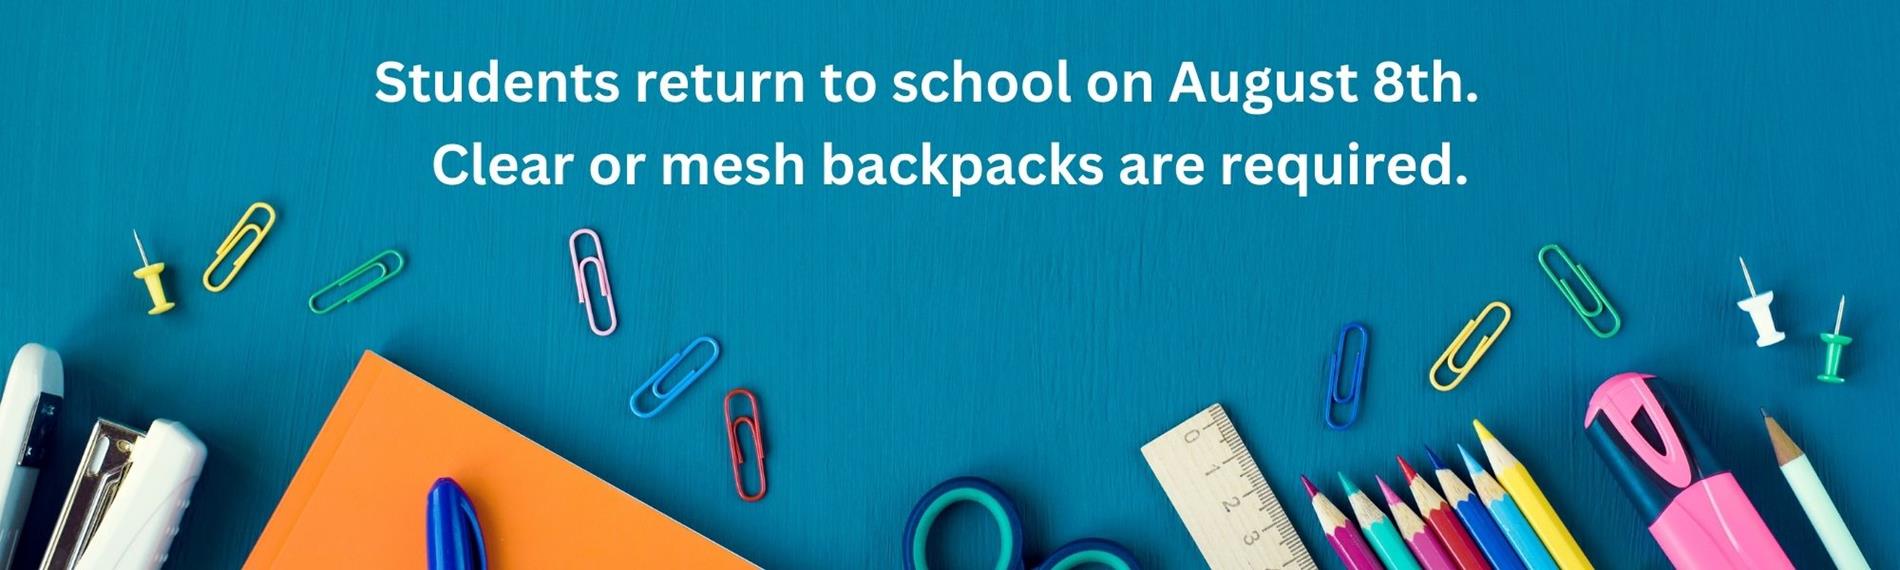 Students return to school on August 8th. Clear or mesh backpacks are required.